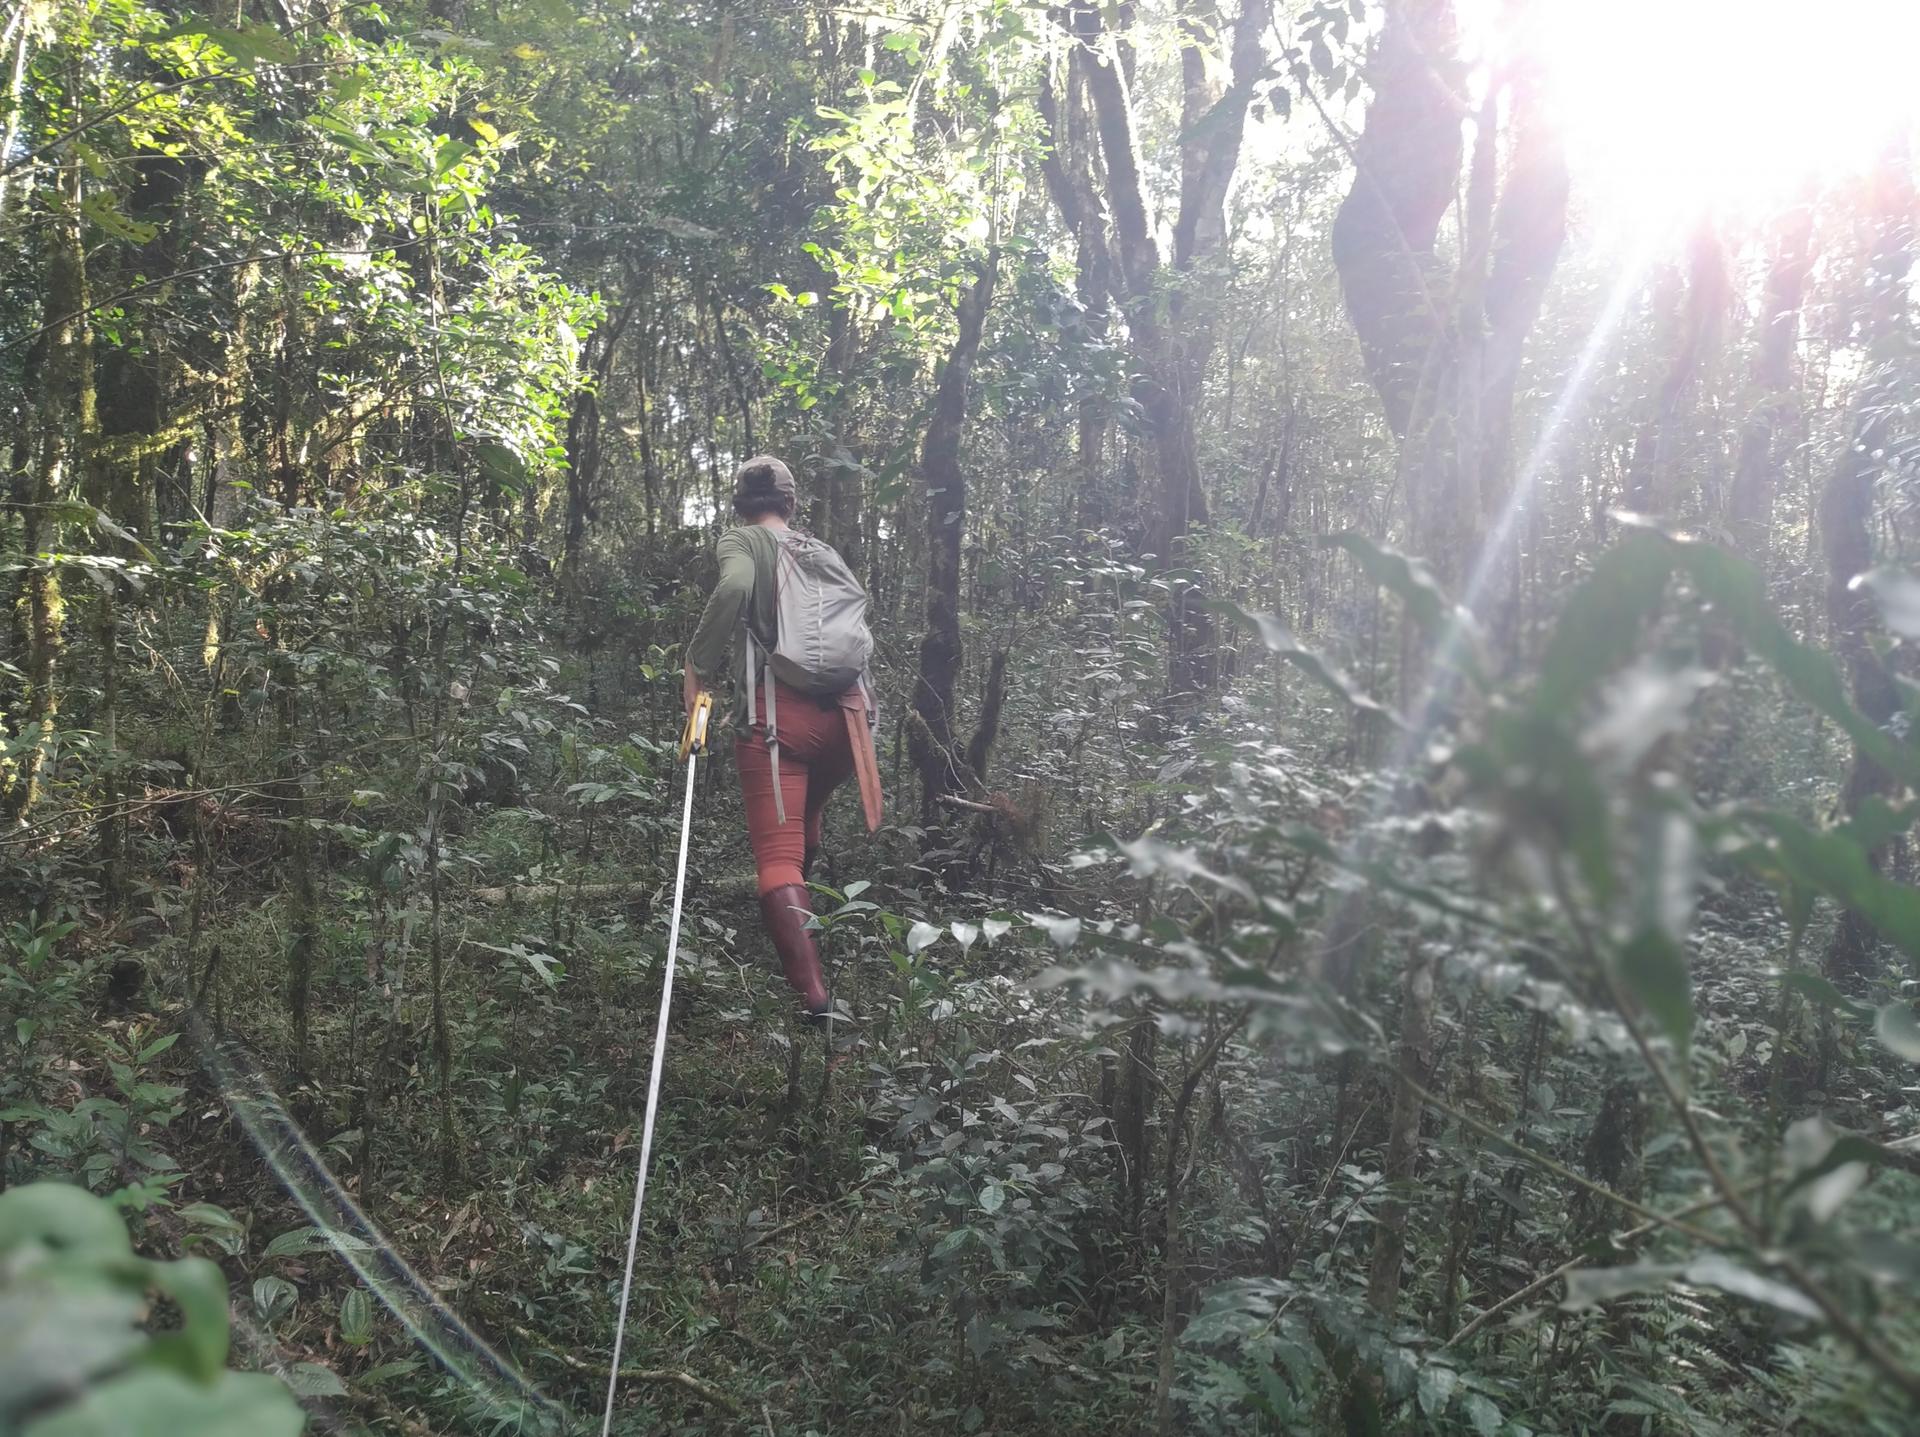 Brazilian researcher Flavia Oliveira in the forest 